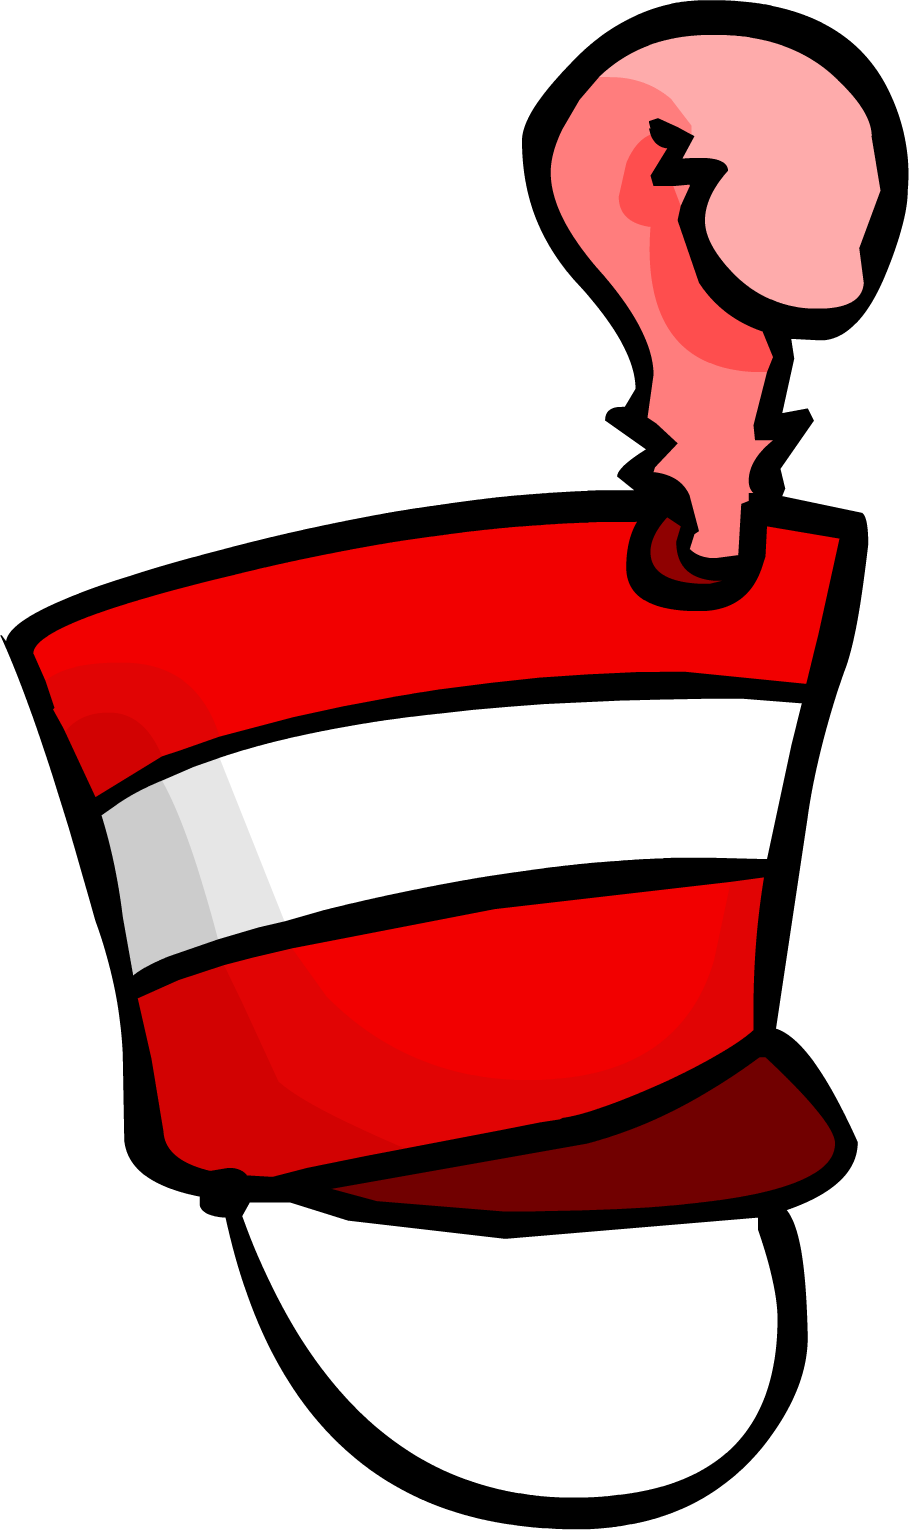 hats clipart marching band